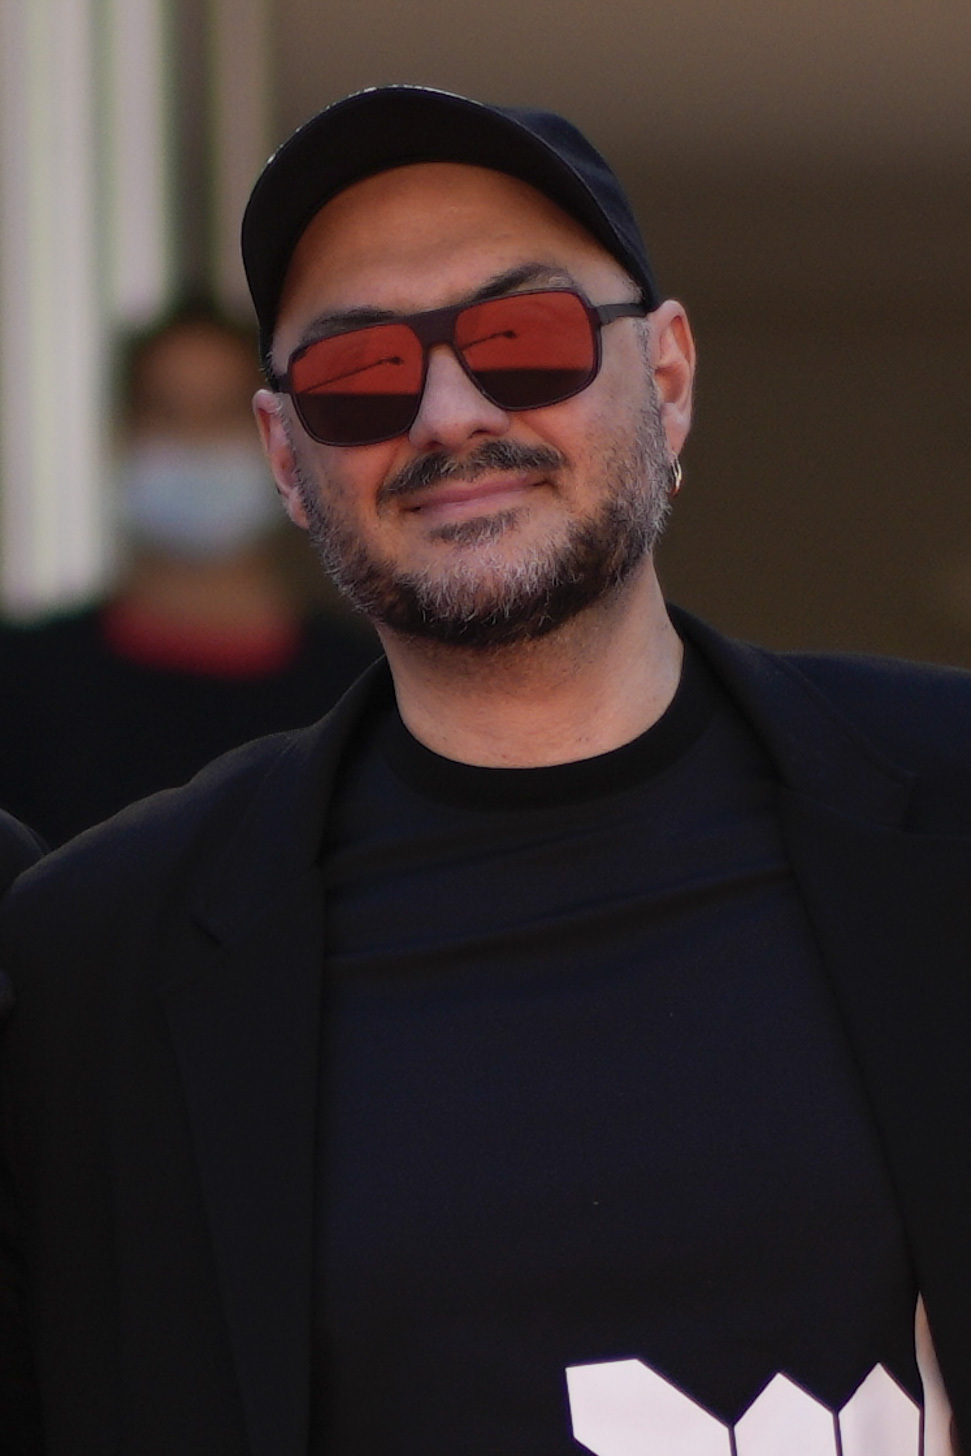 Russian director Kirill Serebrennikov poses upon arrival at the premiere of his film "Tchaikovsky's wife" at the 75th Cannes International Film Festival on Wednesday May 18, 2022 in Cannes, France.  (AP Photo/Daniel Cole)